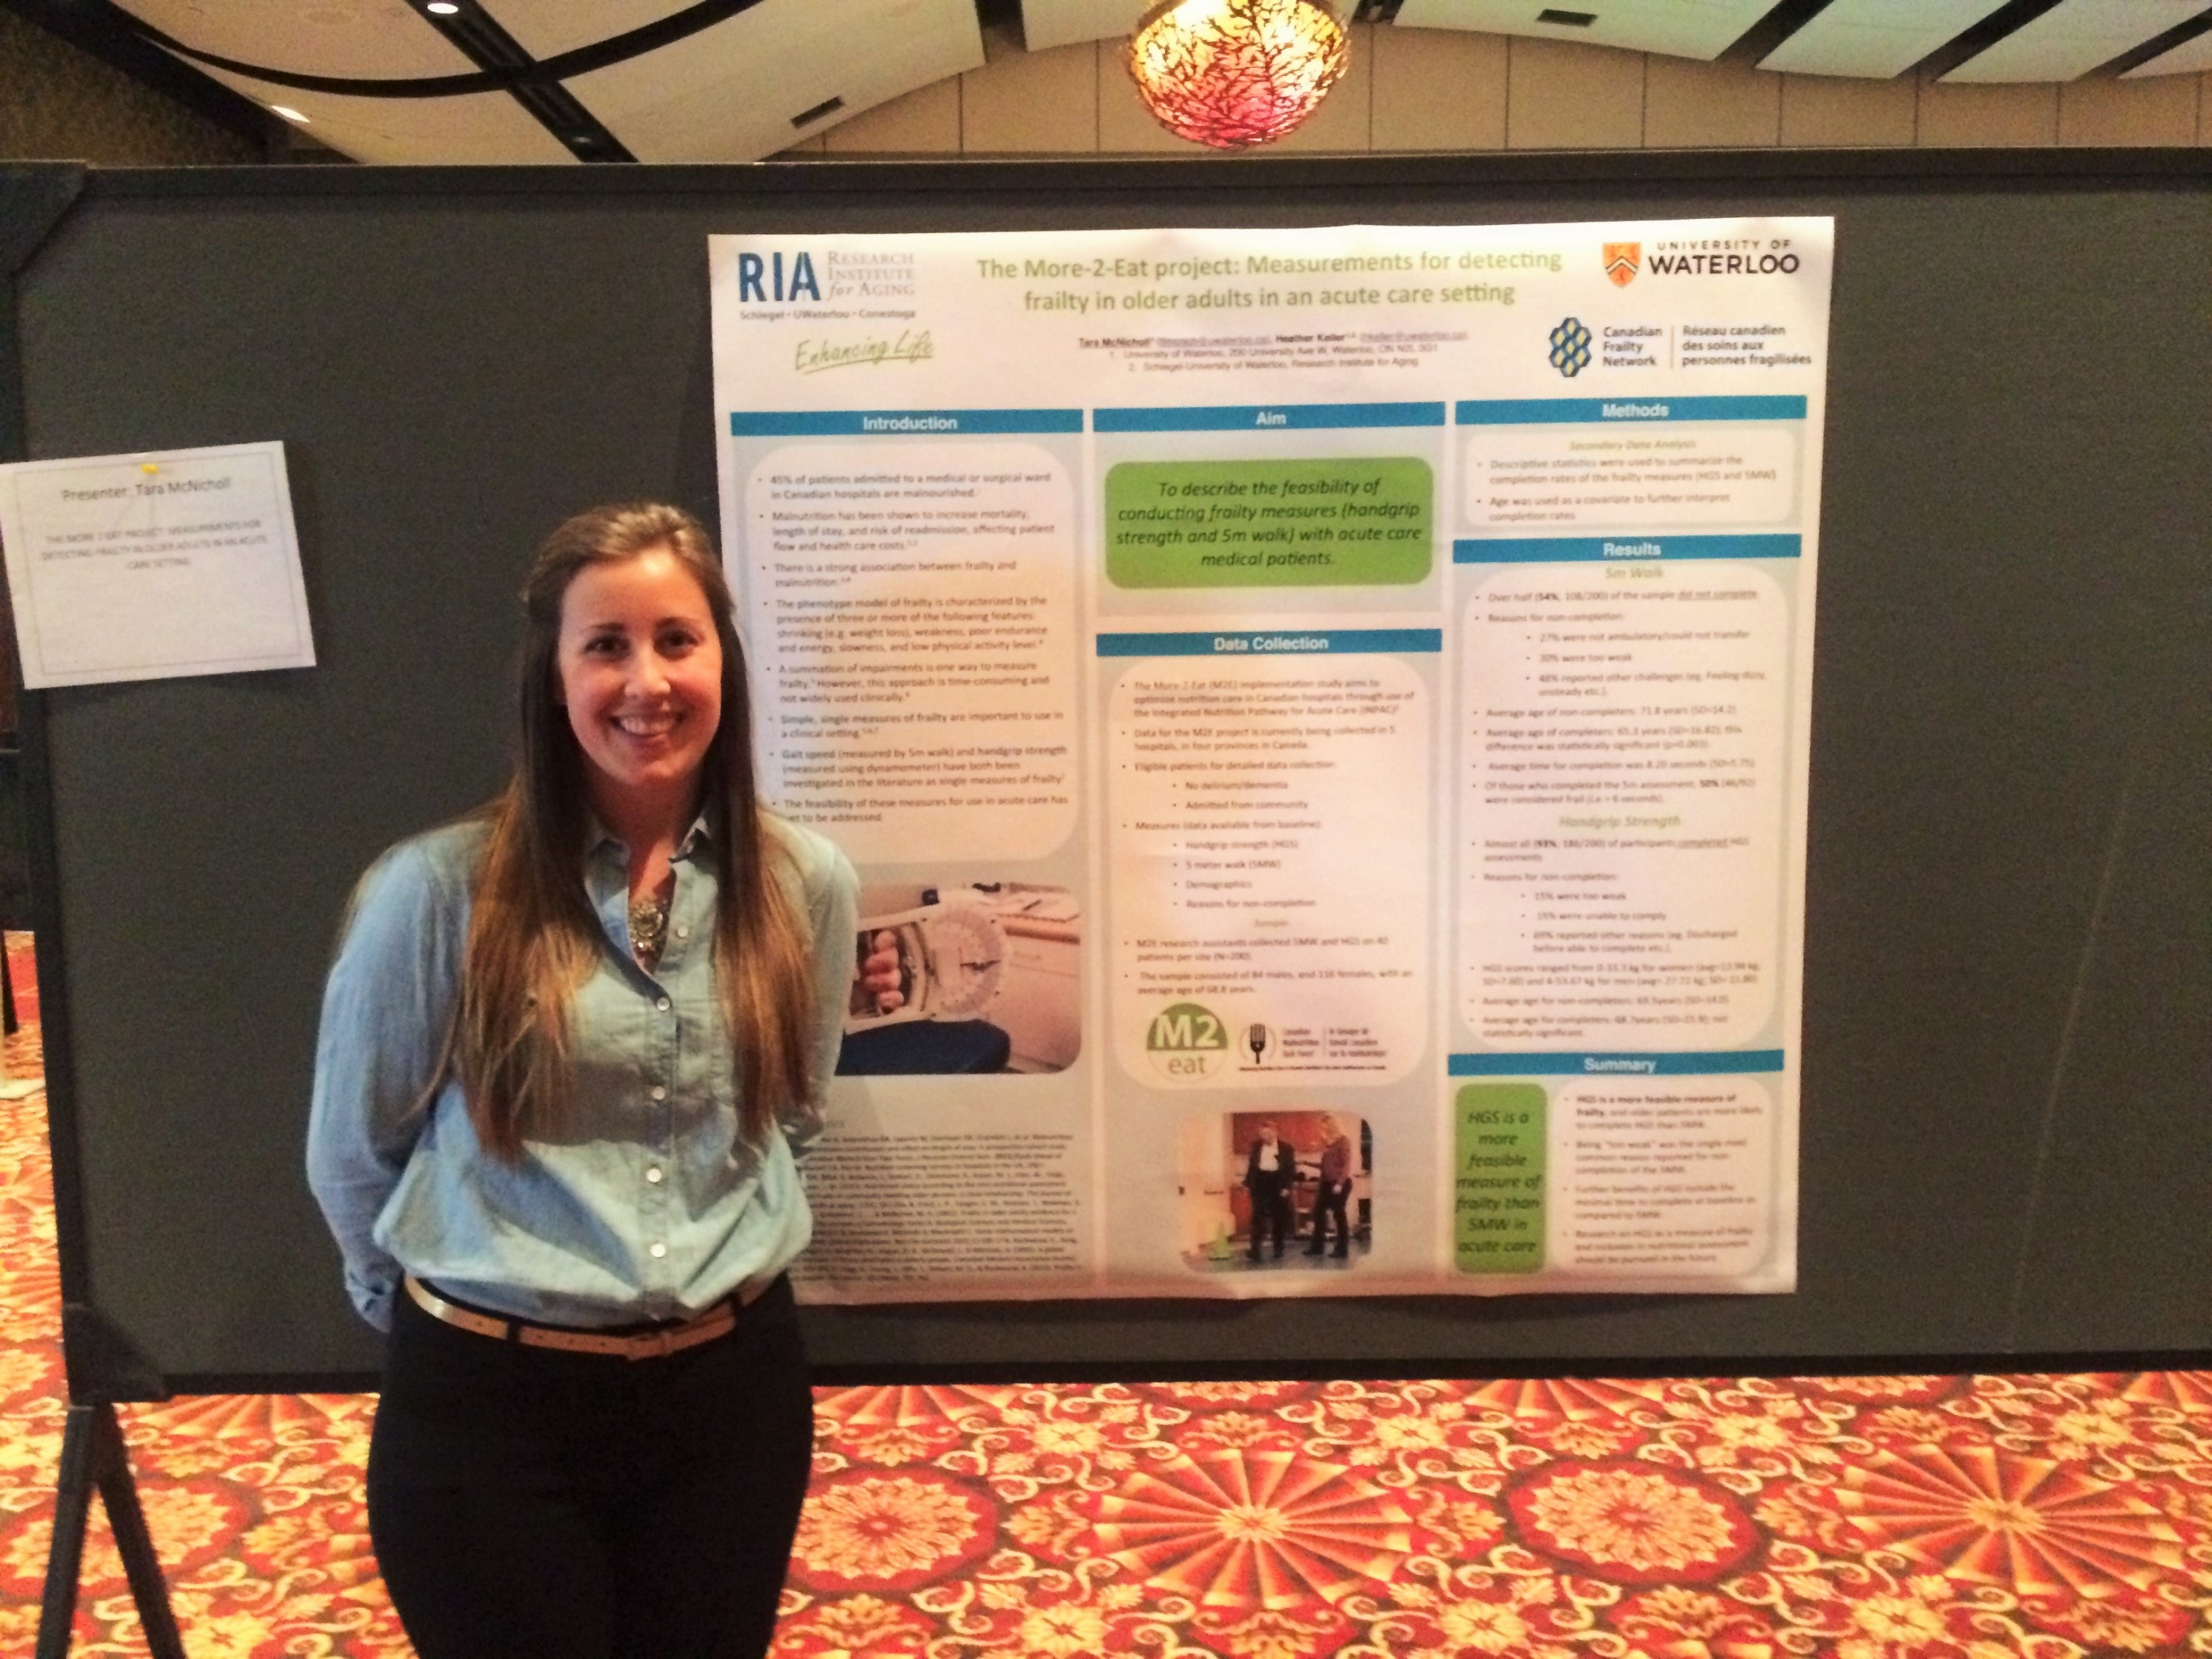 Tara with conference poster